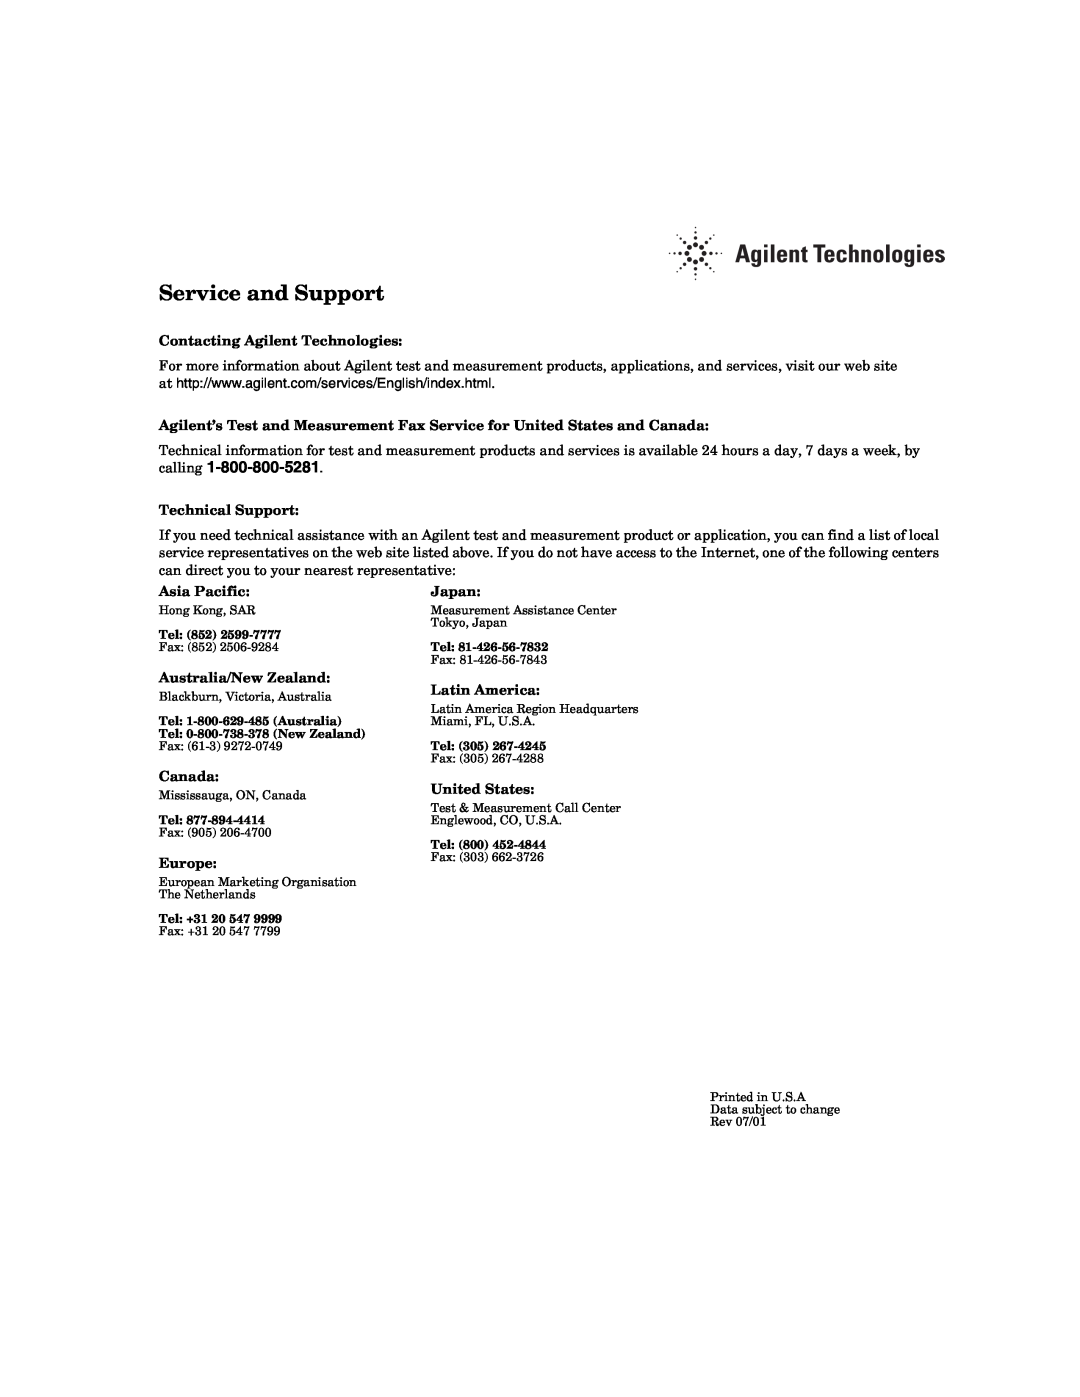 Agilent Technologies 53150A, 53152A, 53151A manual Service and Support, calling 